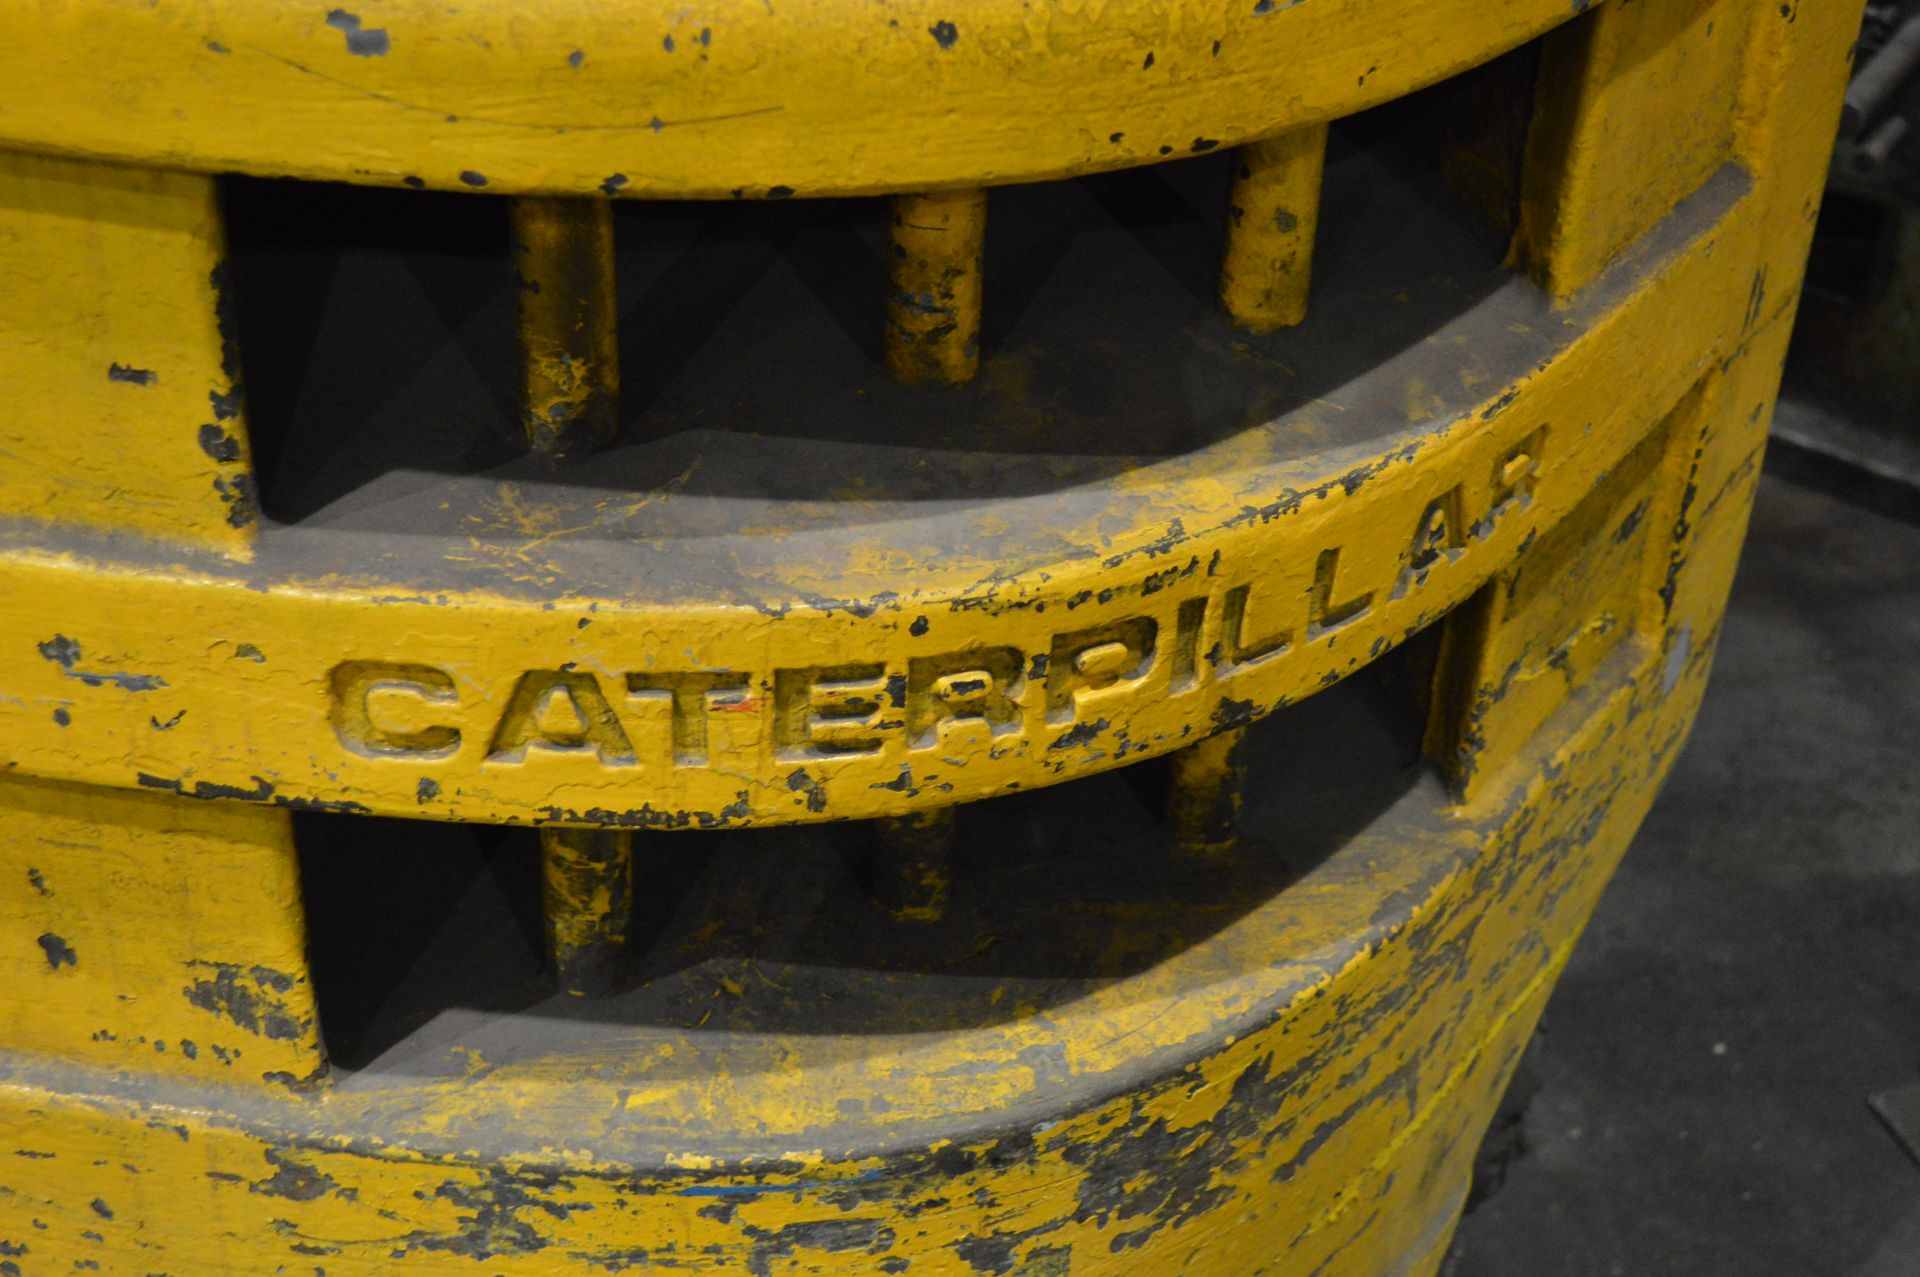 Caterpillar V50B TYPE G 2500kg cap GAS ENGINE FORK LIFT TRUCK, serial no. 54W328,., 3710mm max - Image 7 of 9